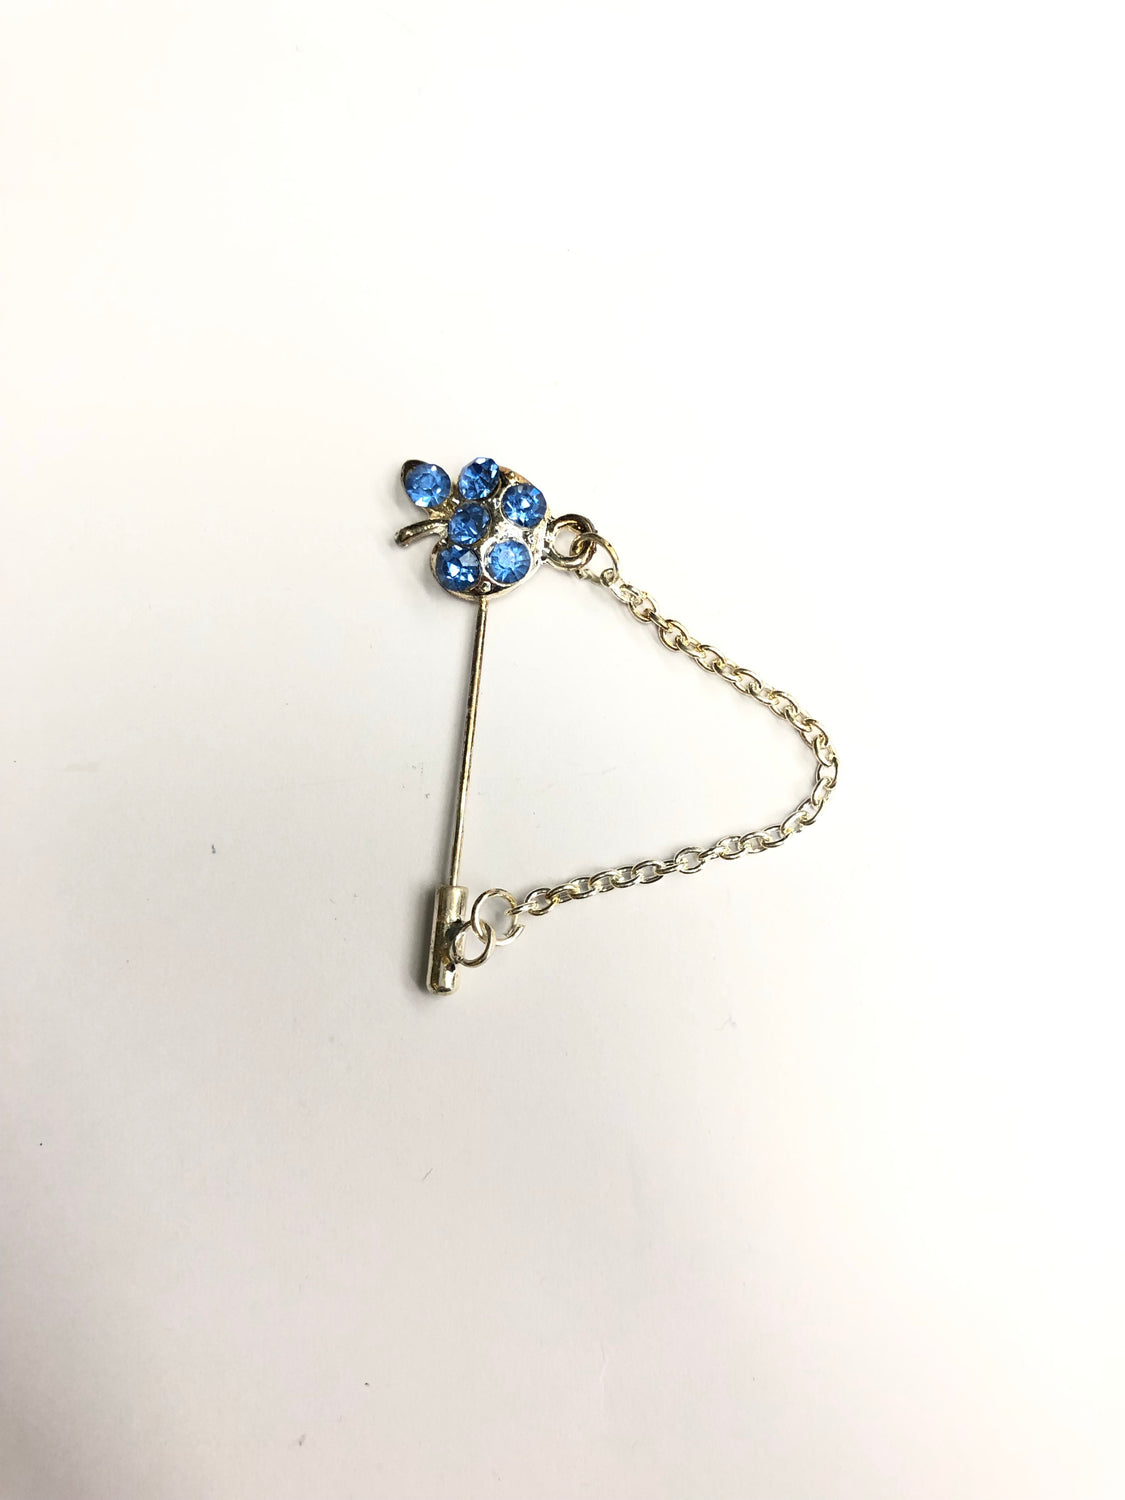 clasp pin with blue apple jewel and a chain